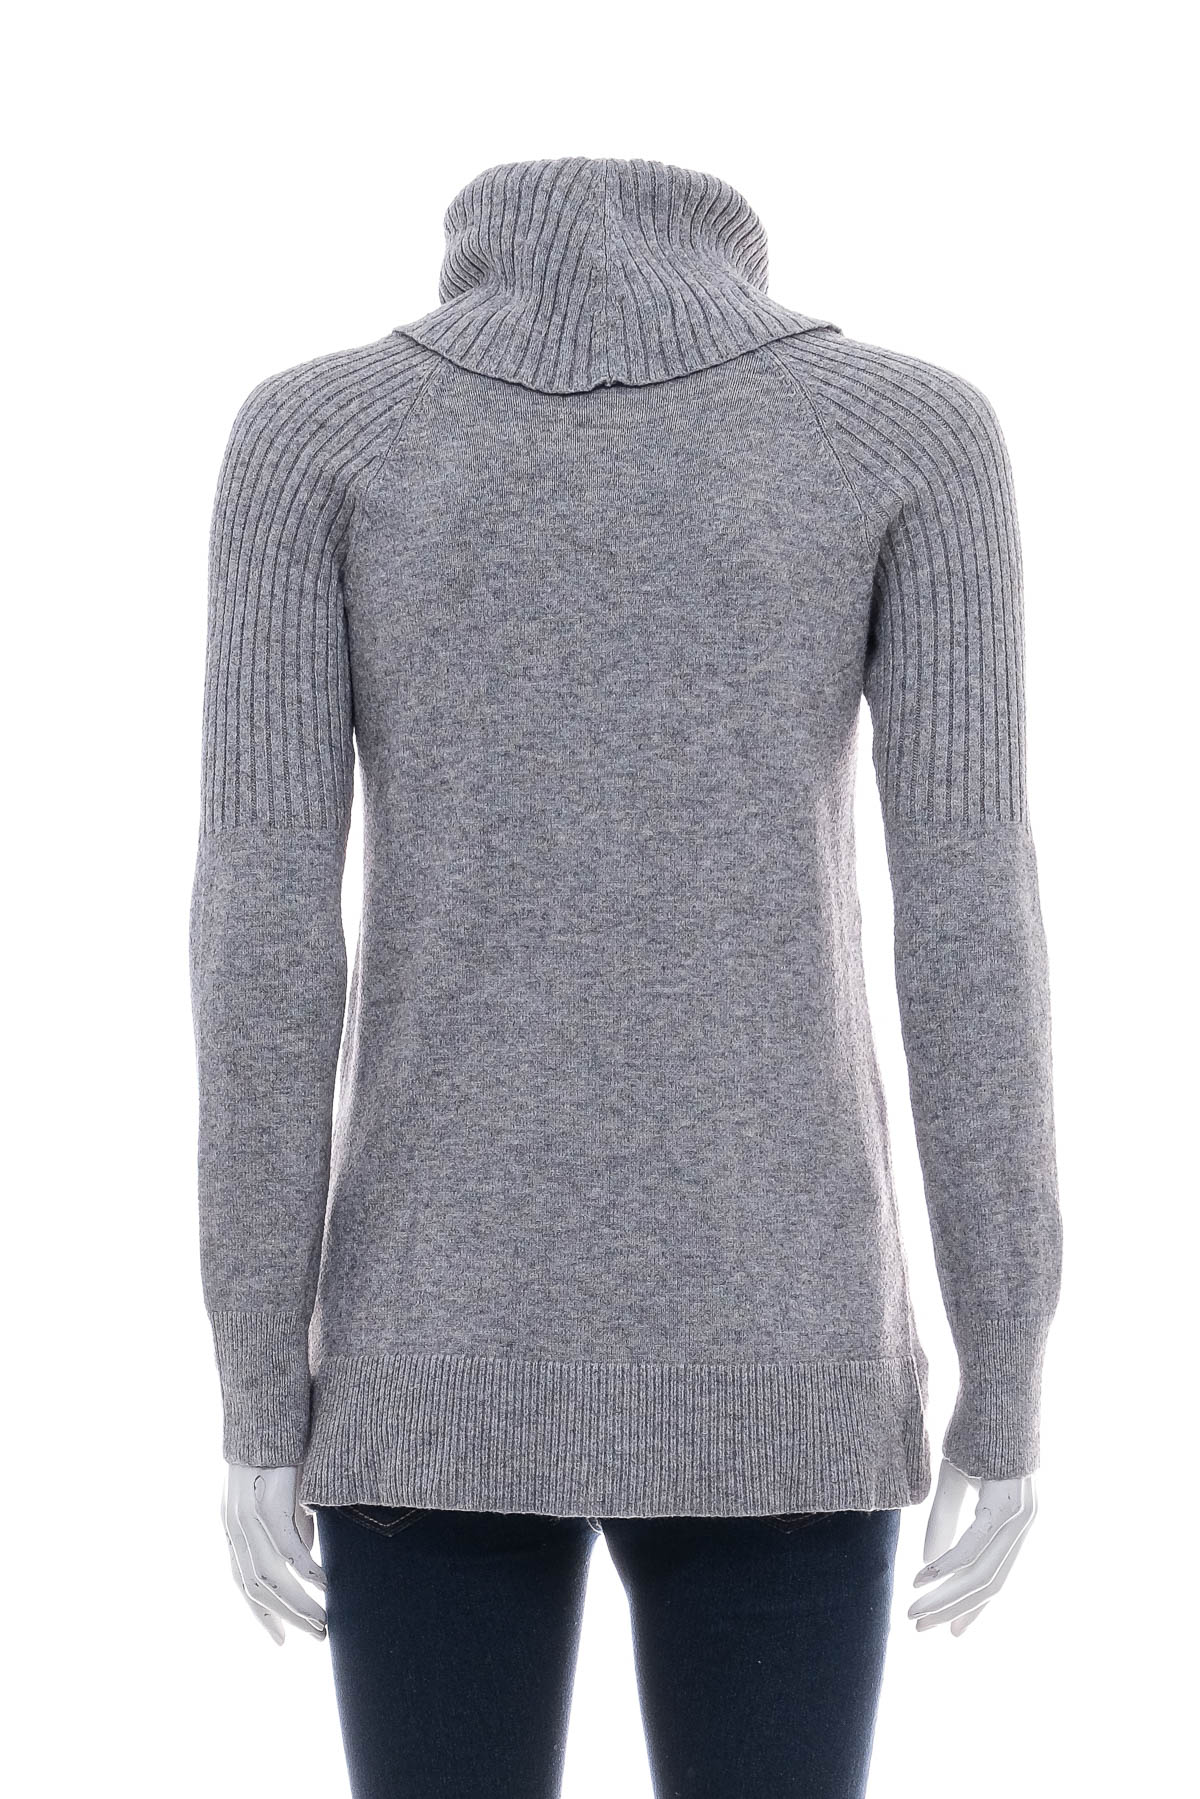 Women's sweater - TIME and TRU - 1